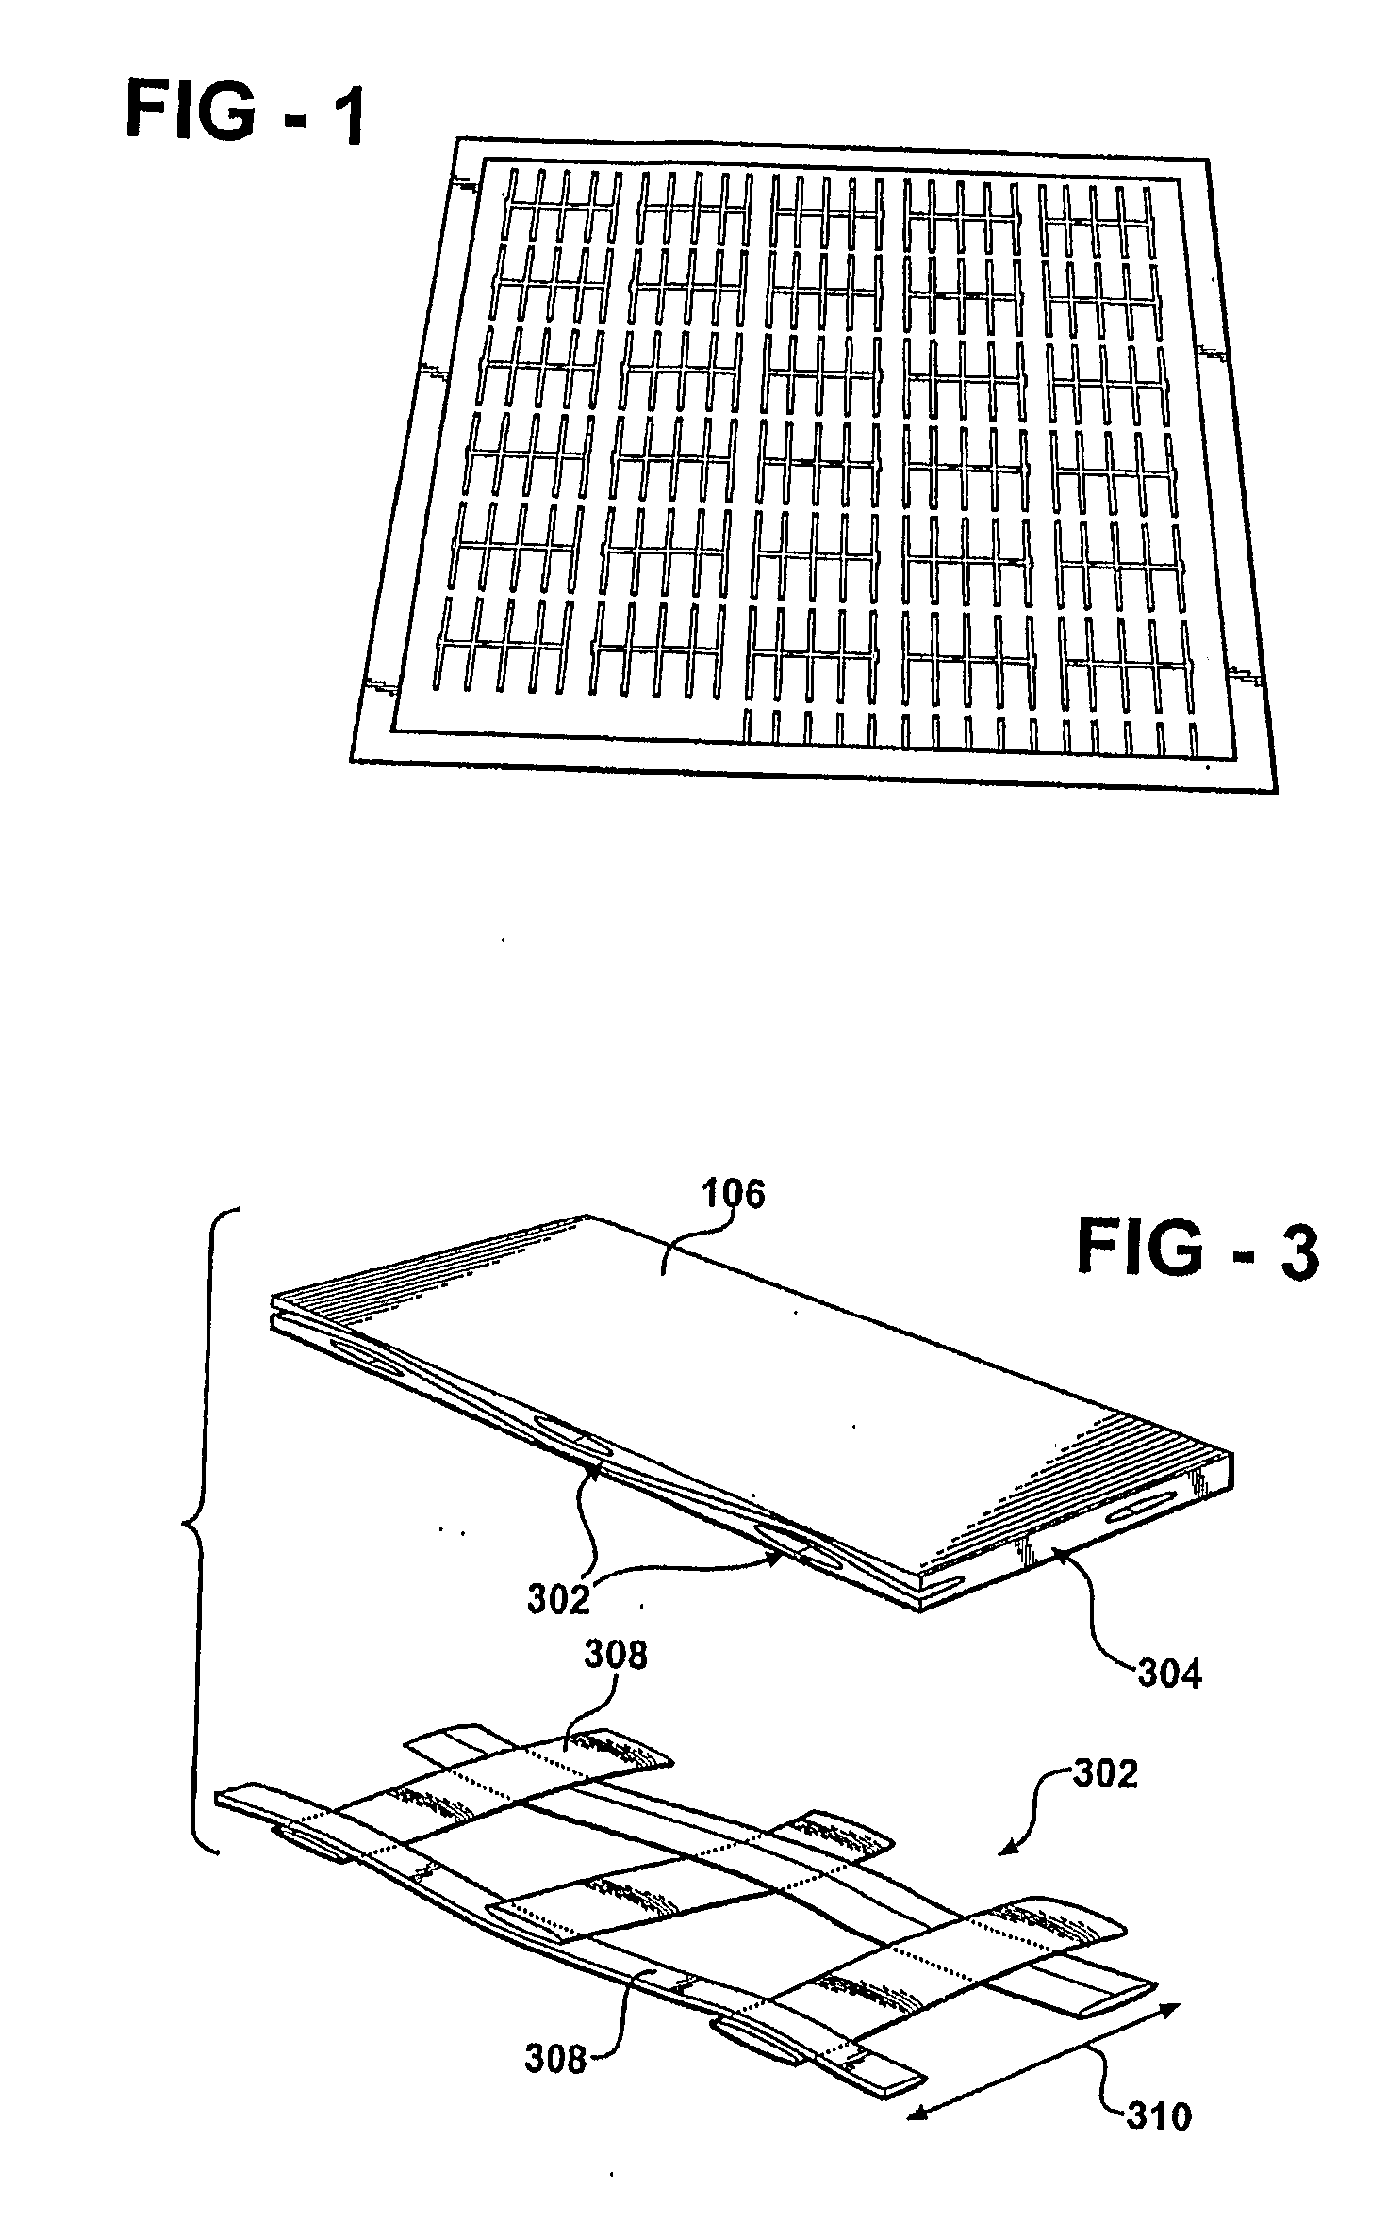 Copper Indium Diselenide-Based Photovoltaic Device And Method Of Preparing the Same